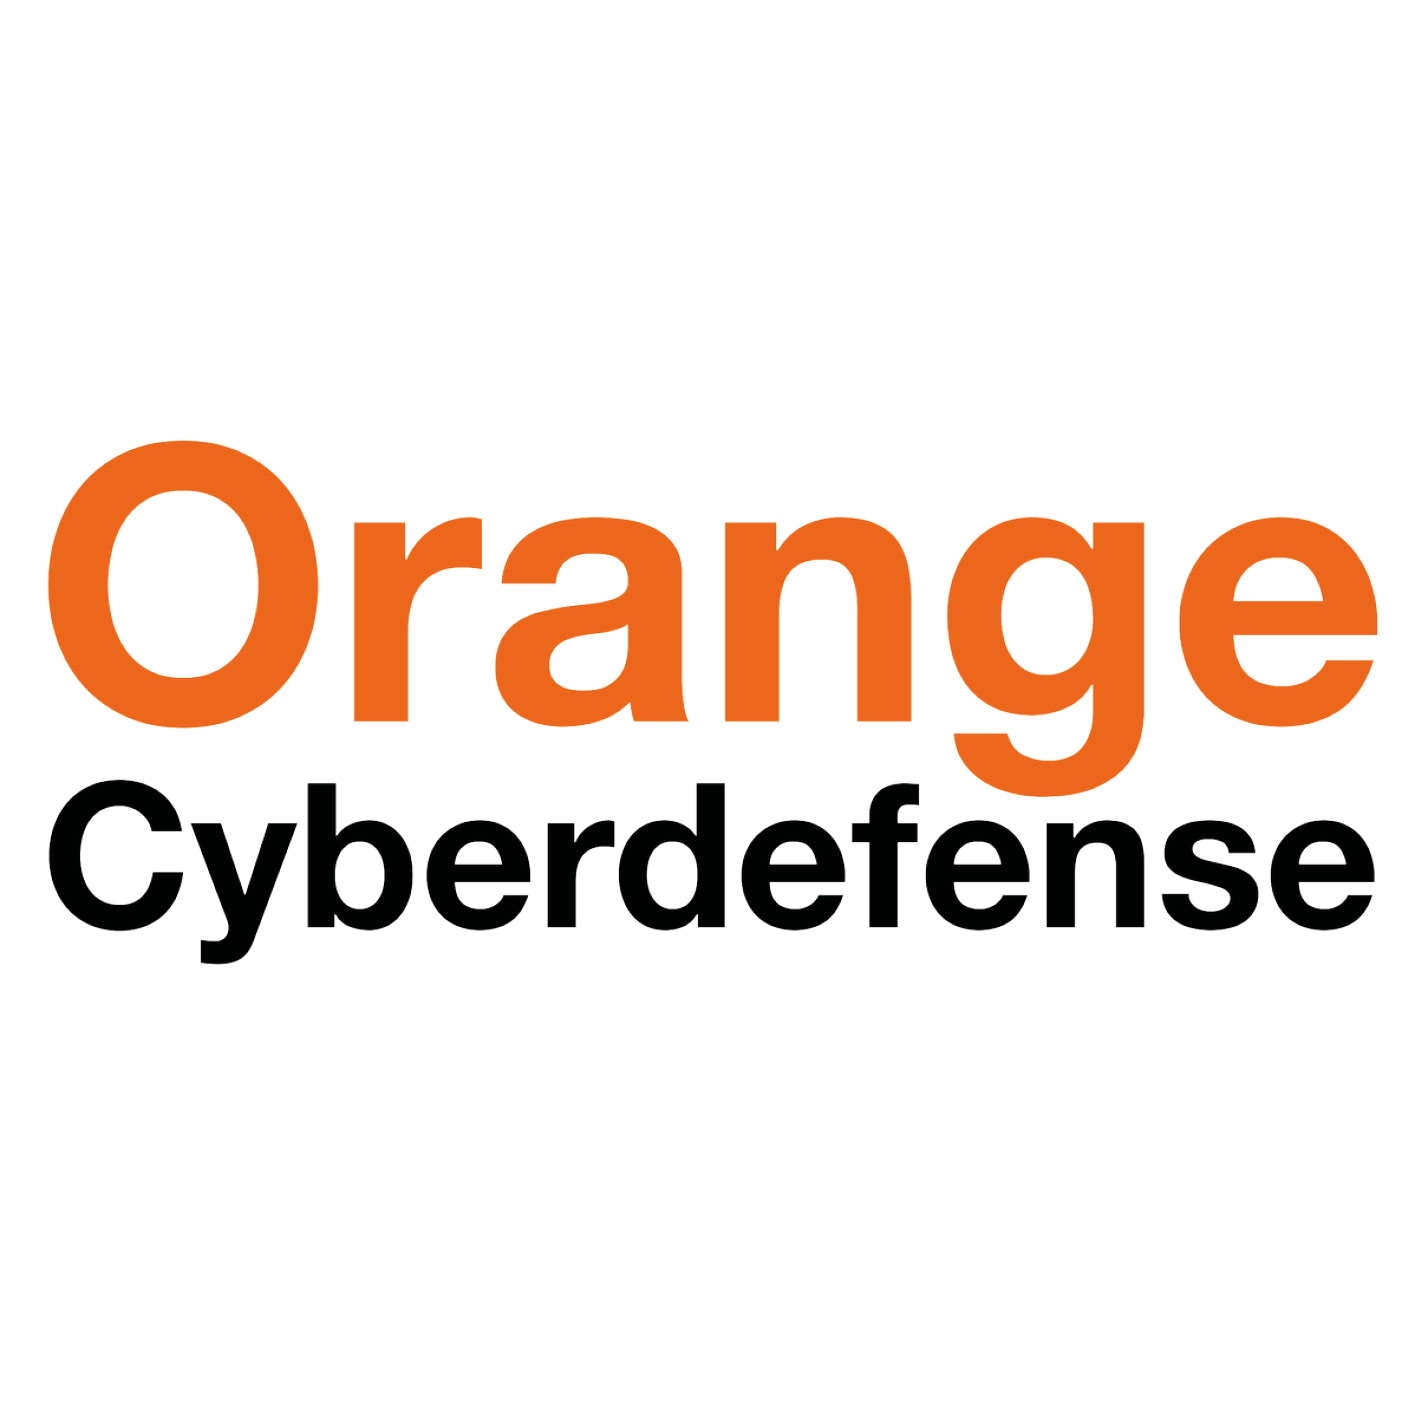 Orange Cyberdefense offers companies and institutions a “sovereign” solution with Ercom Cryptobox to strengthen their digital security